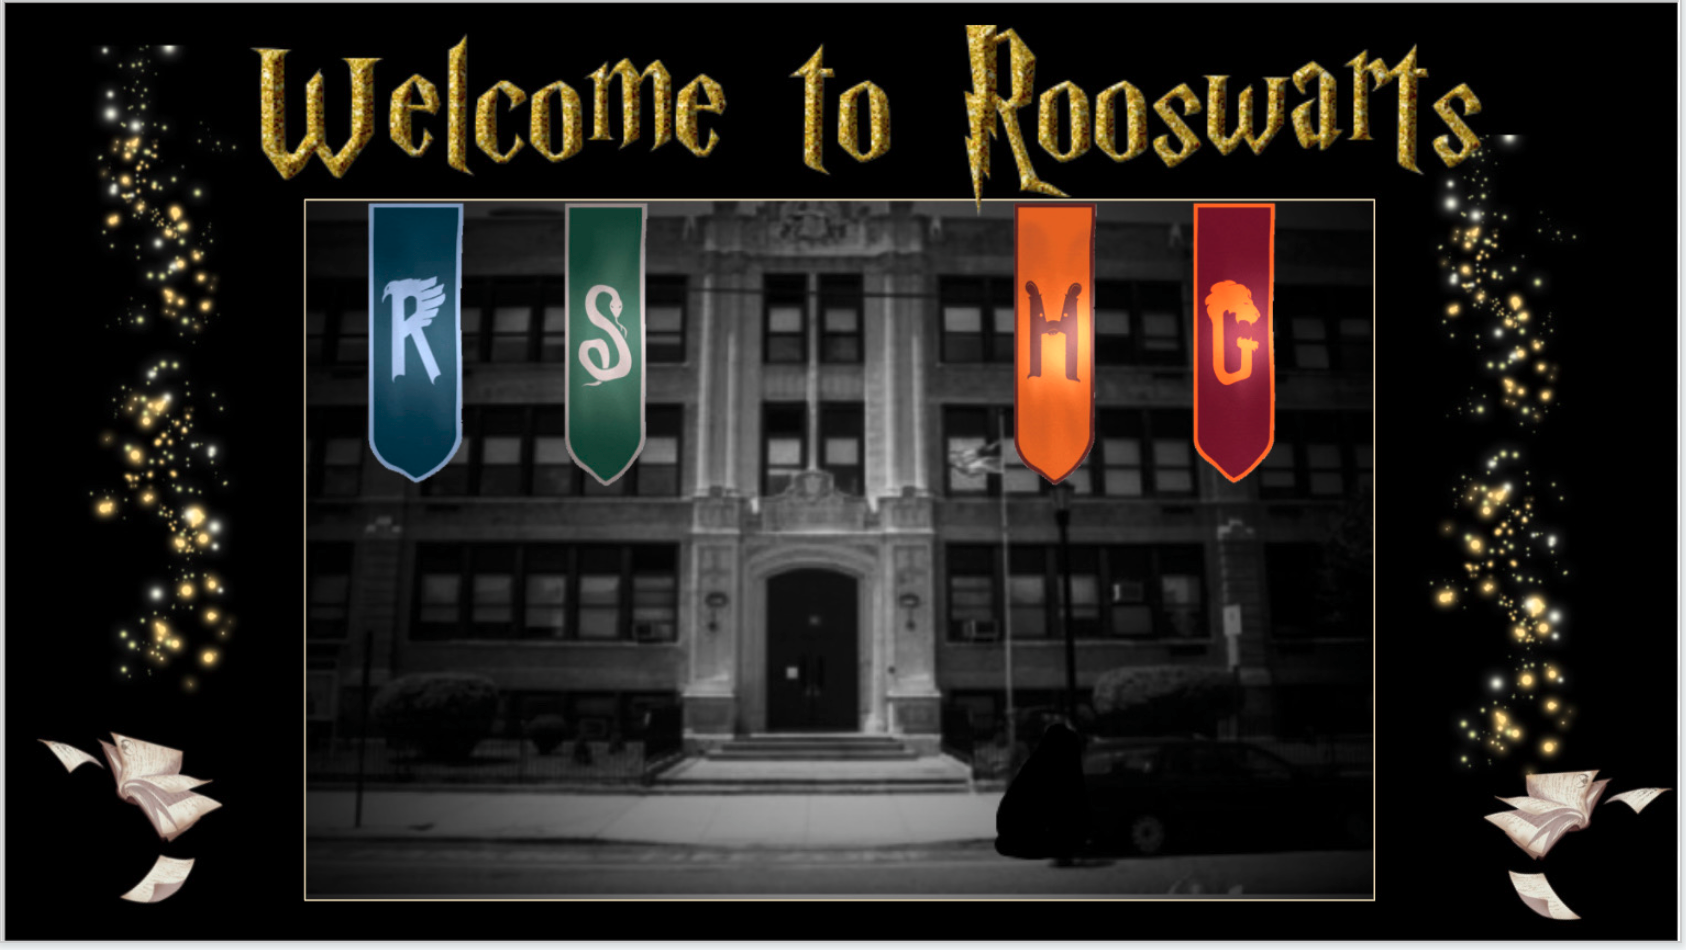 Welcome to the Rooswarts School of Wizardry!